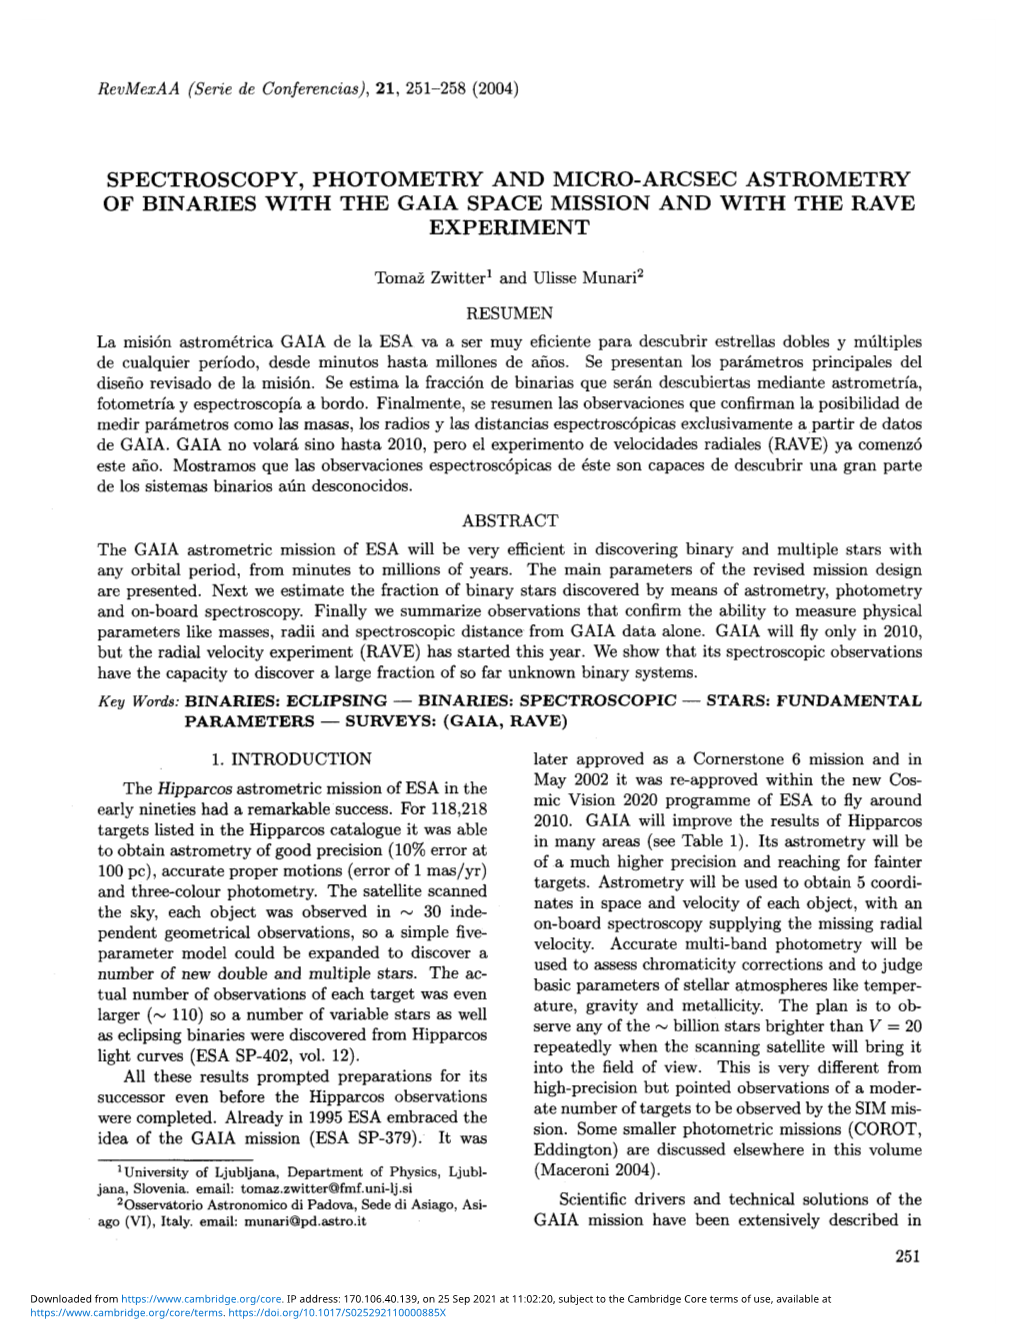 Spectroscopy, Photometry and Micro-Arcsec Astrometry of Binaries with the Gaia Space Mission and with the Rave Experiment